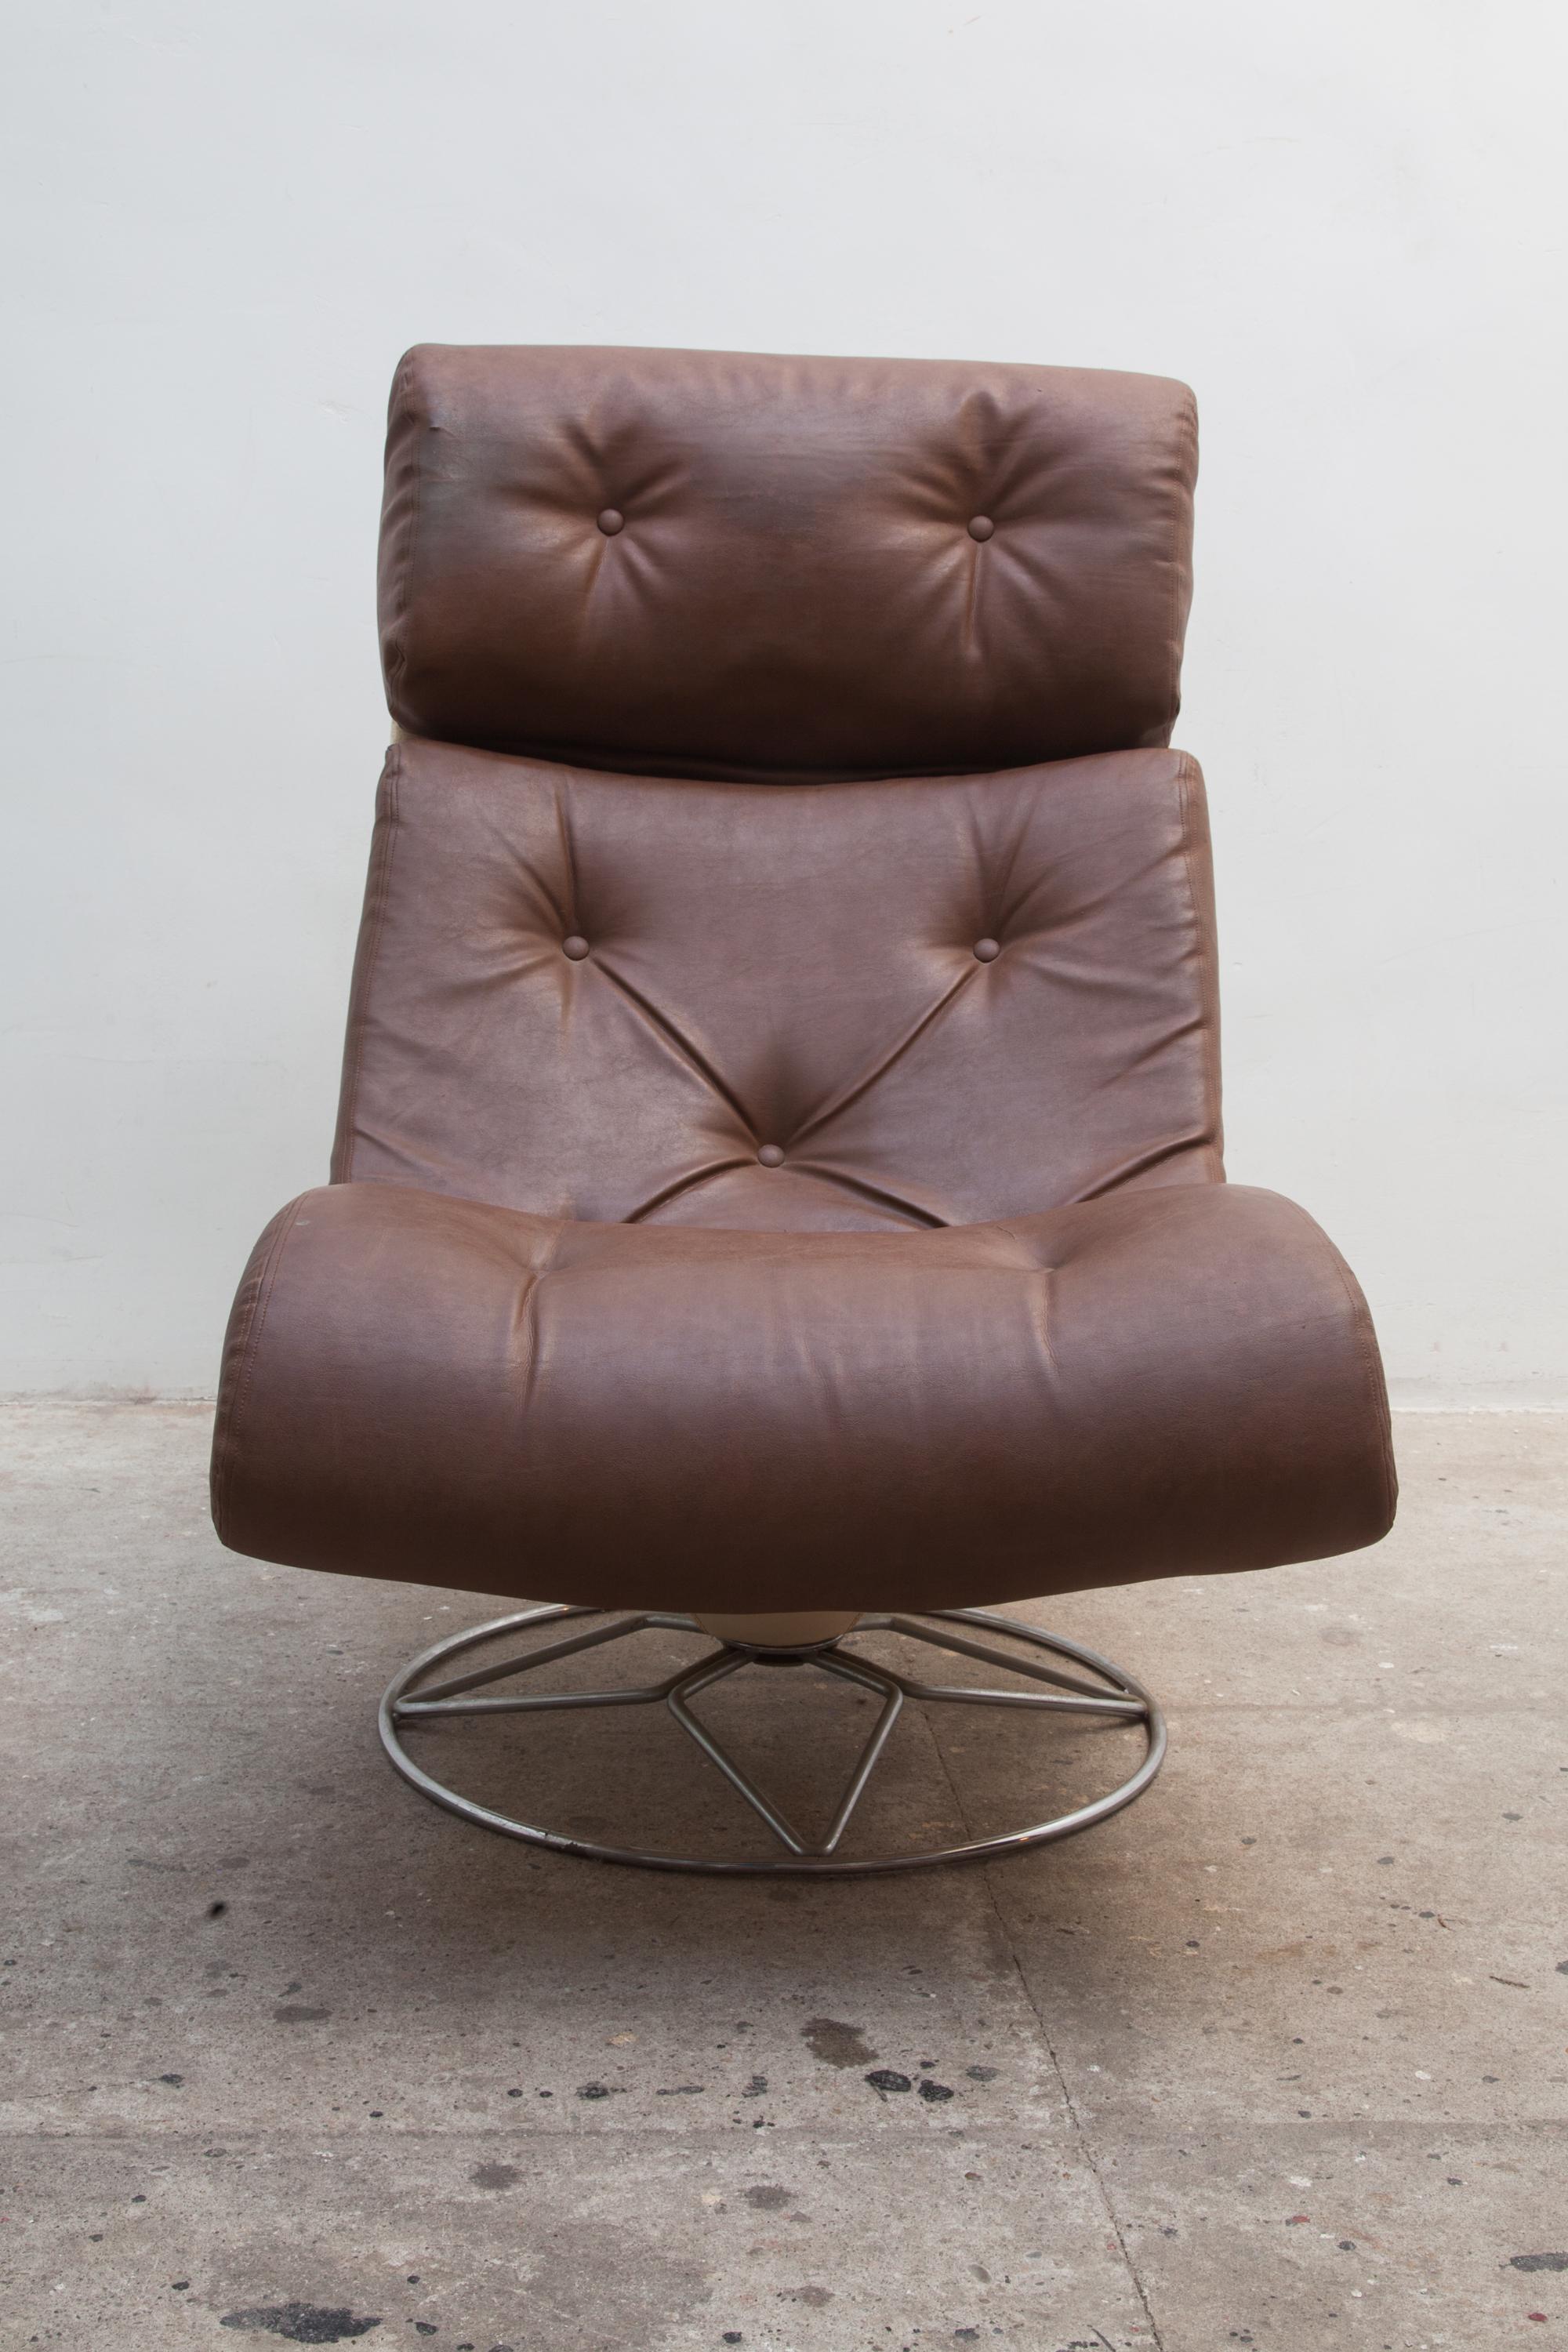 Mid-Century Modern original 1970s space swivel lounge chair.
The base is made of metal chromed which fully rotates the back of the chair is a white cream color soft suede seat the front tufted brown faux leather cushion. Designer unknown.
         